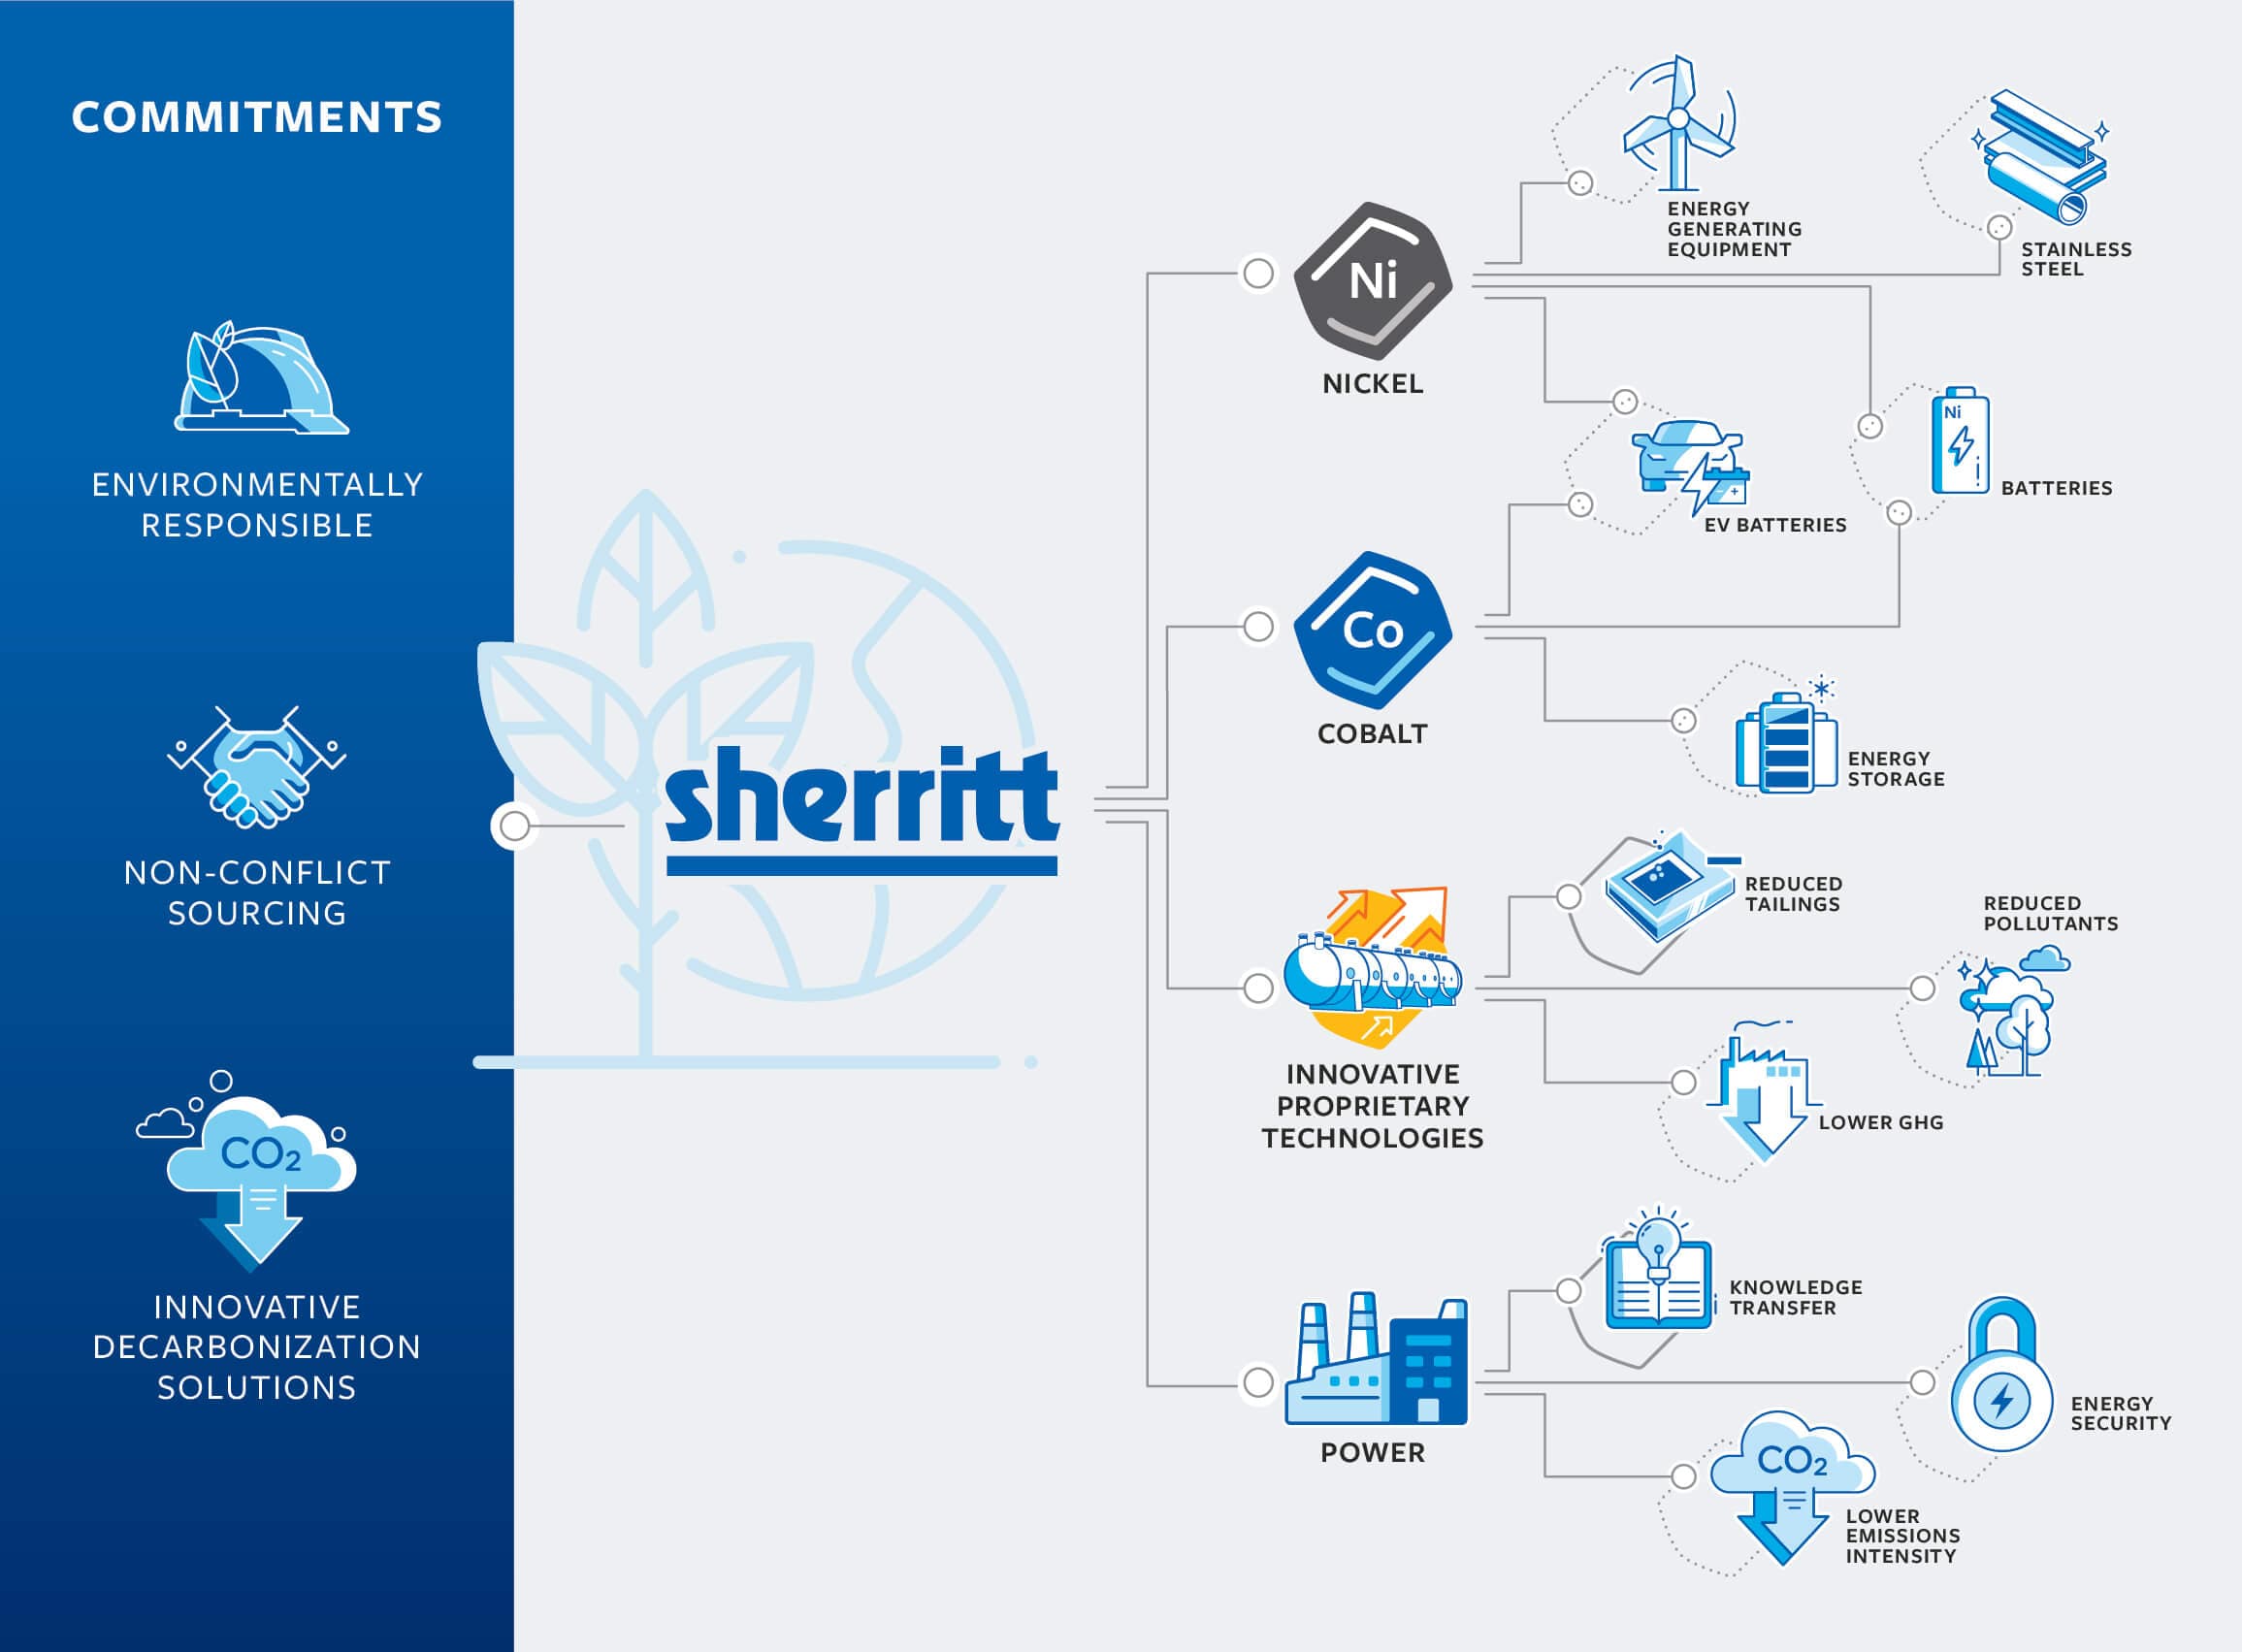 A graphic illustrating an outline of Sherritt’s stated commitments as they relate to being environmentally responsible, seeking out non-conflict sourcing and finding innovative decarbonization solutions